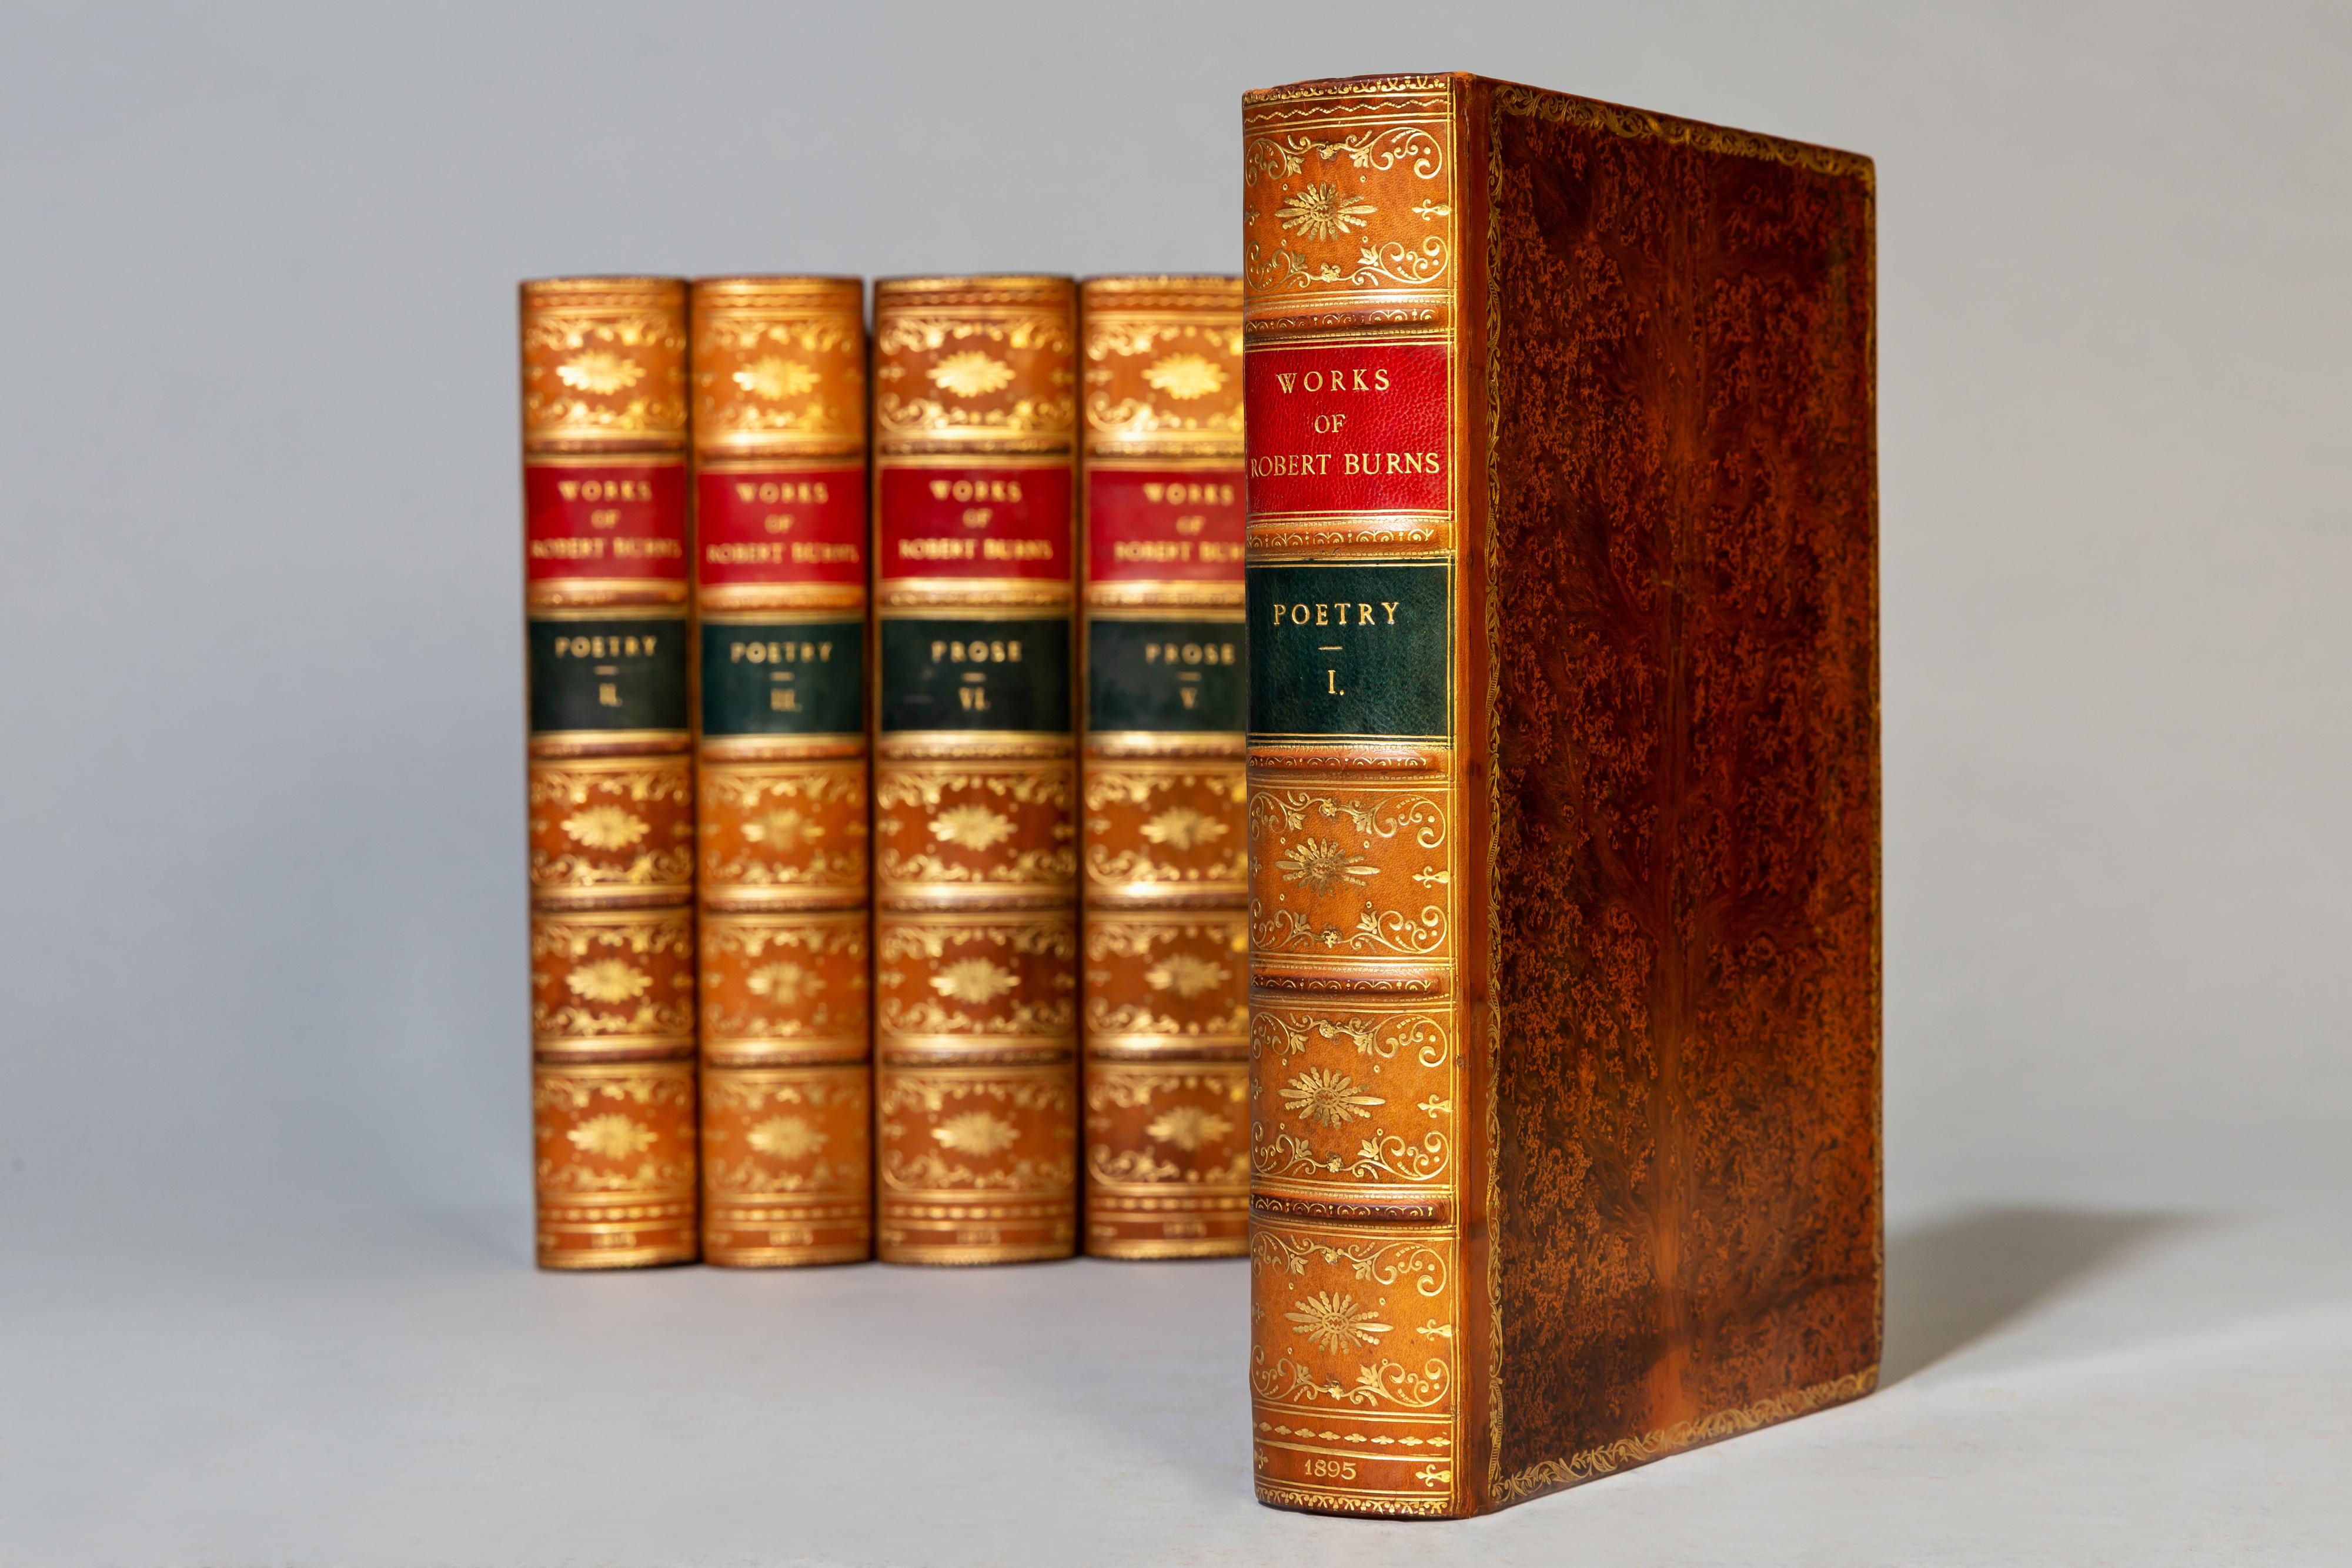 6 volumes.

Bound in full tree calf by Henderson, top edges gilt, raised bands, ornate gilt on spines. 

Published: Edinburgh: James Thin 1895

Handsome set.